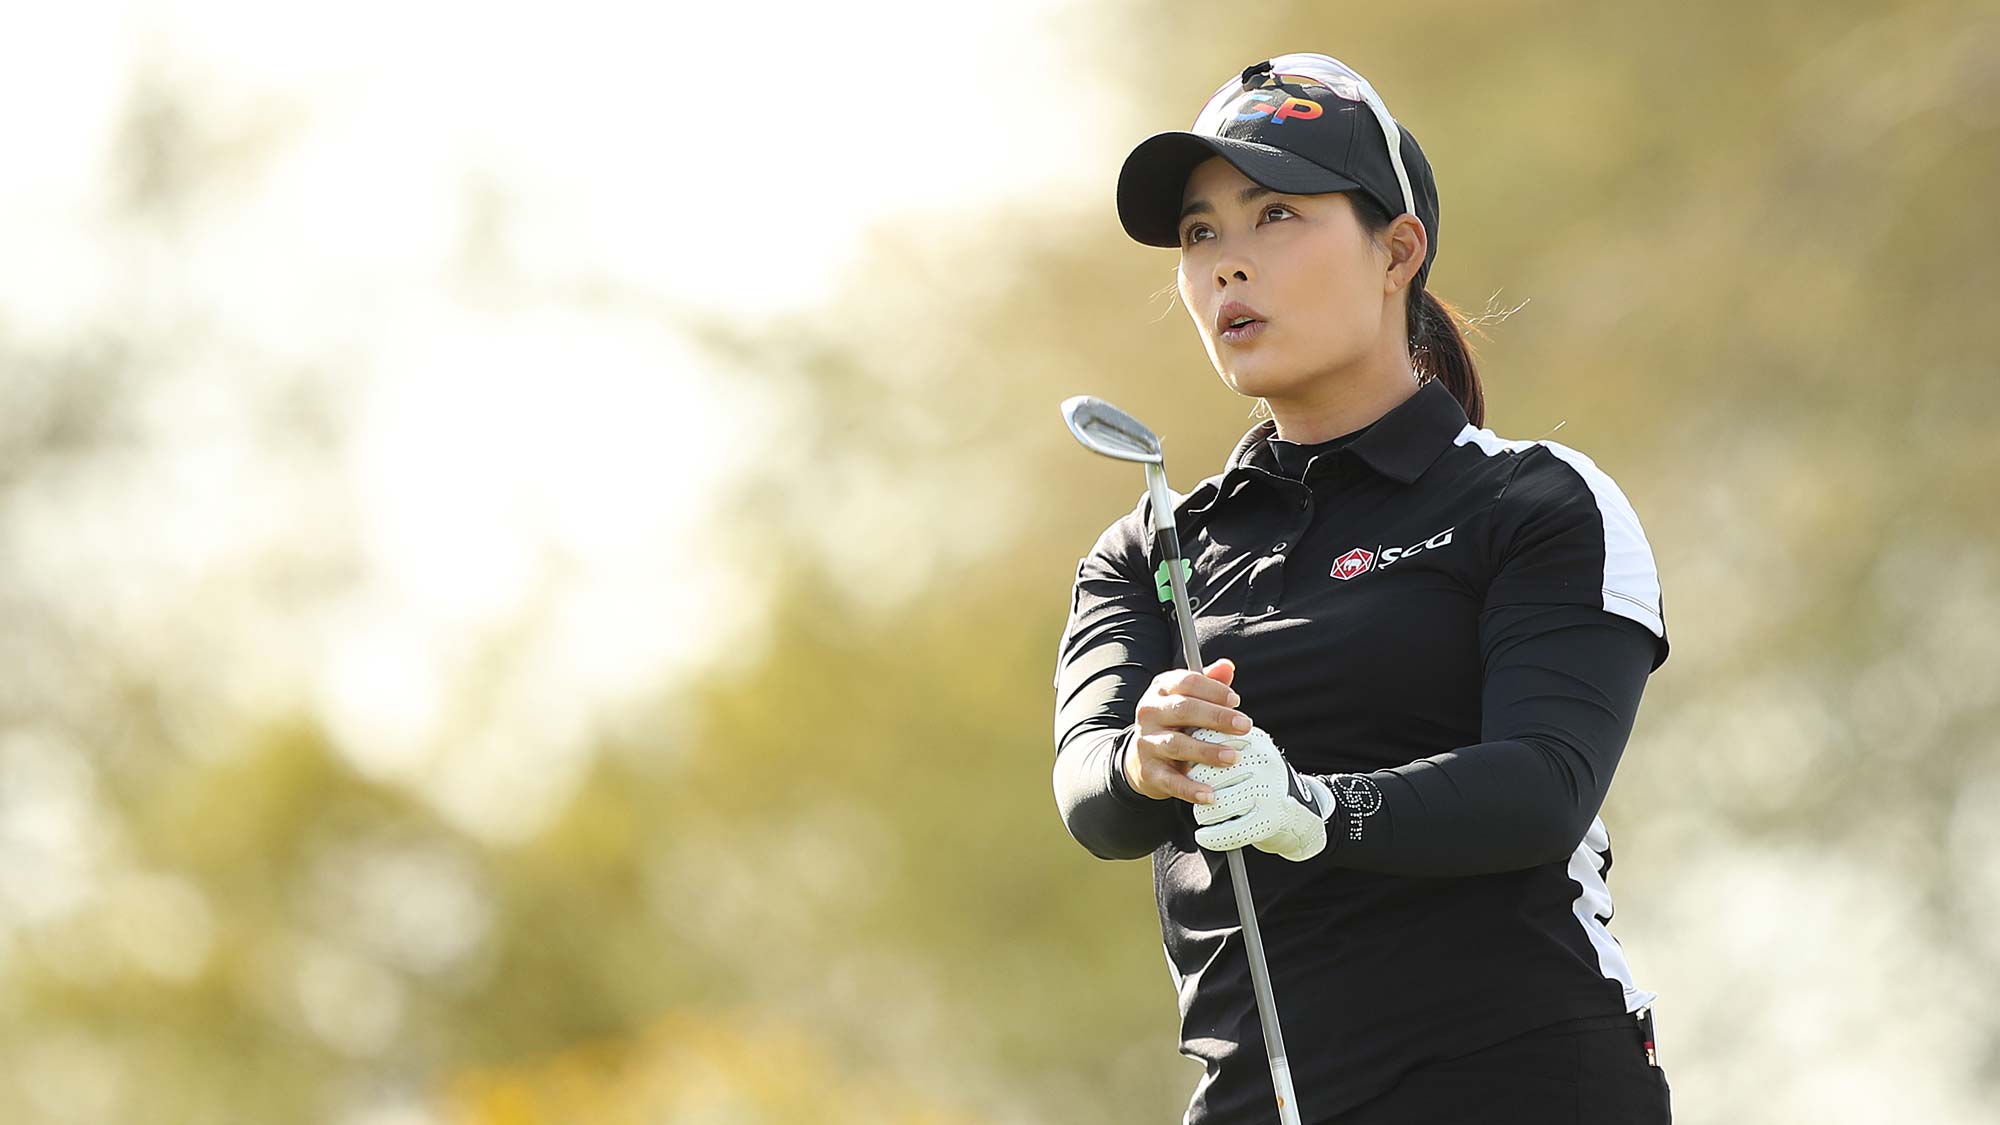 Moriya Jutanugarn of Thailand plays her shot from the 12th tee during the third round of the LPGA Drive On Championship